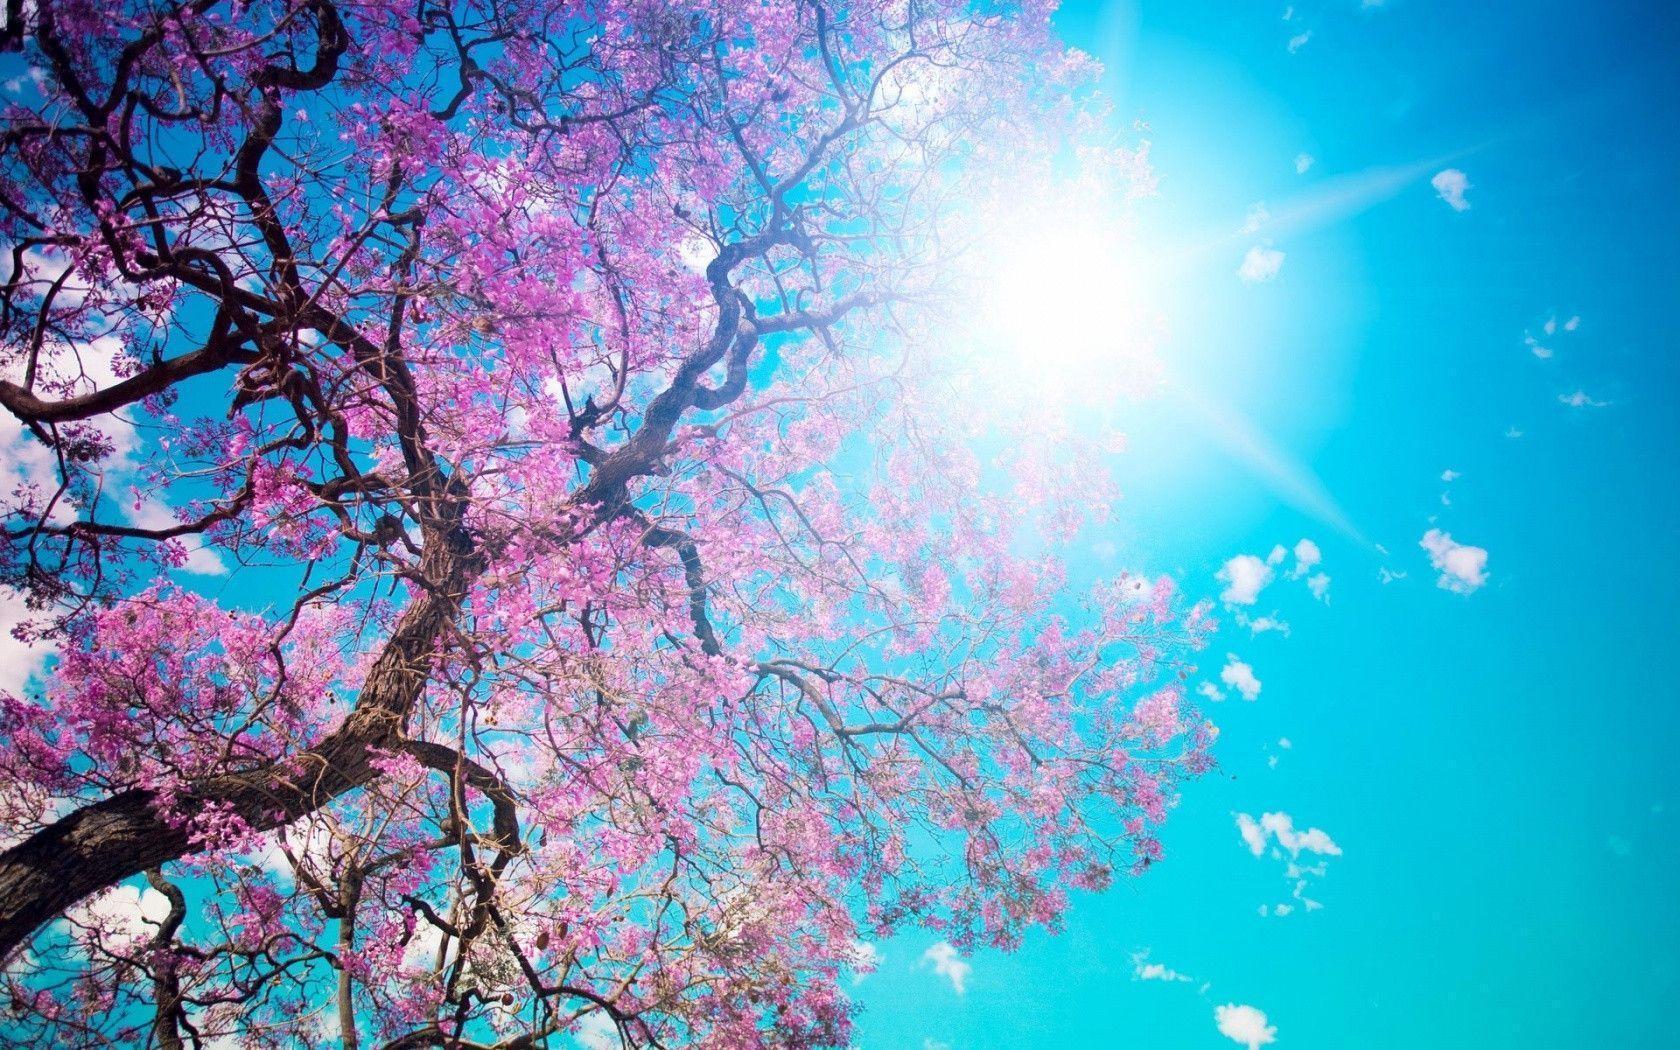 Spring Backgrounds For Computer